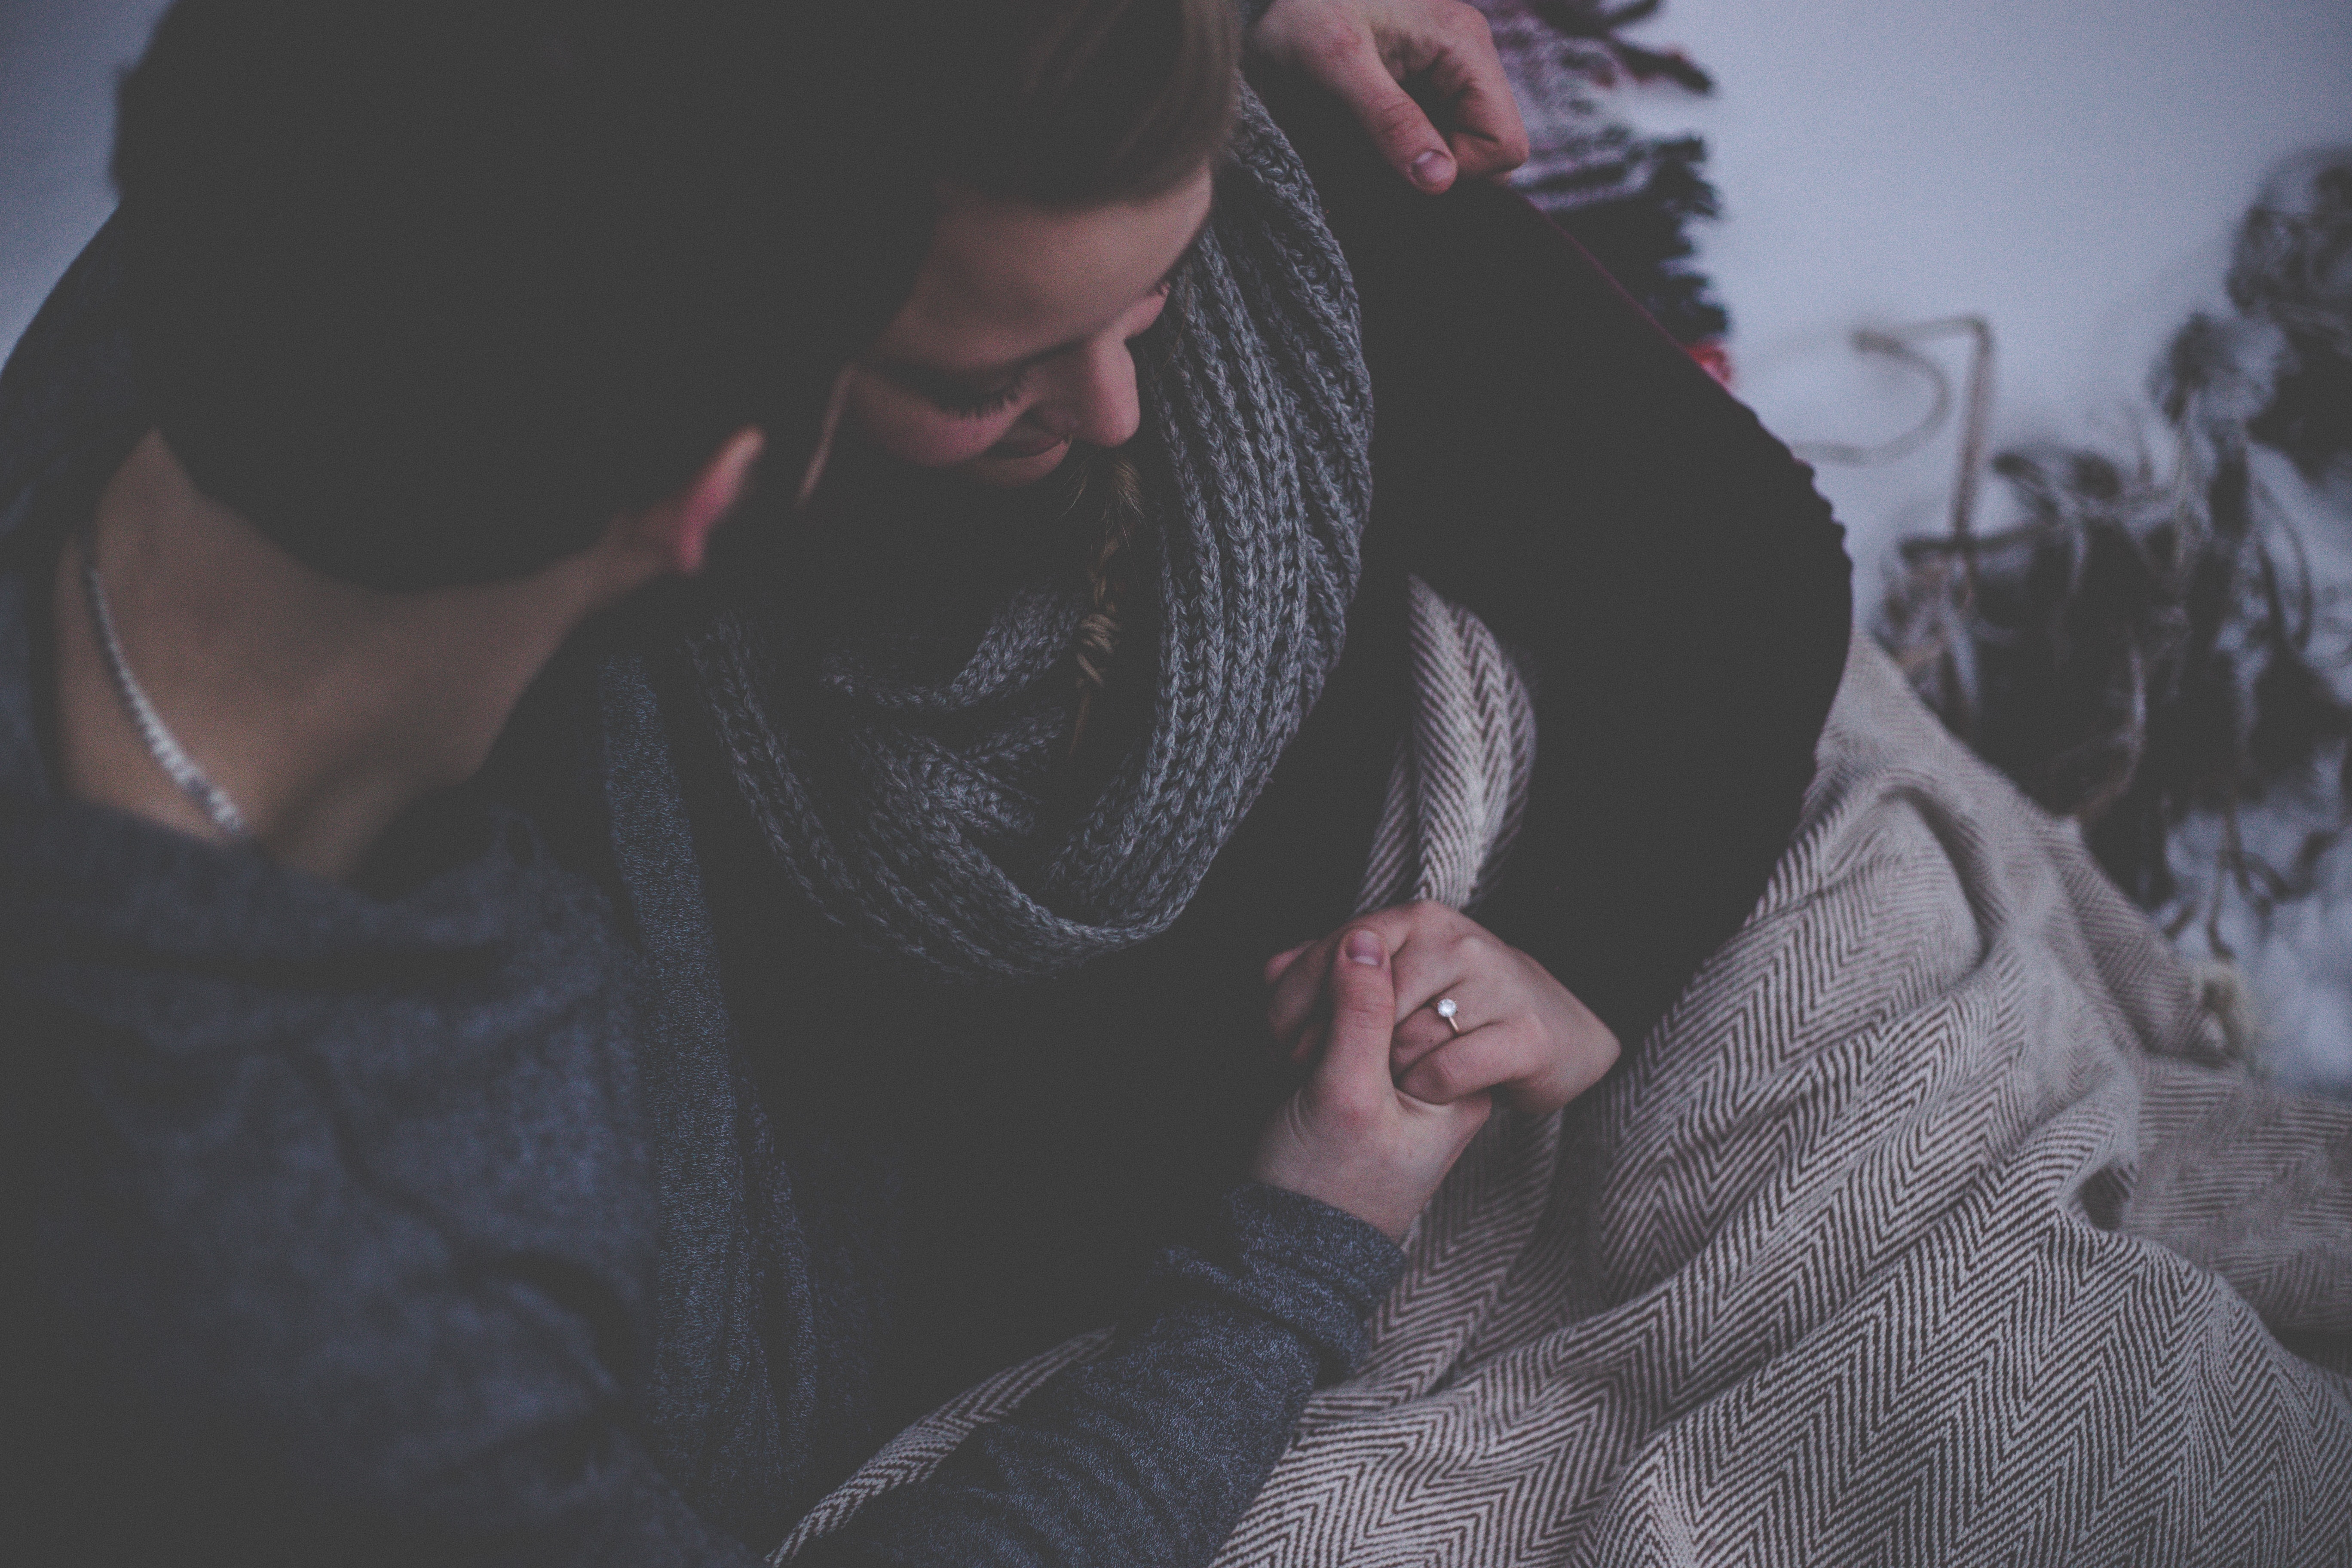 A Couple Being Cozy. | Source: Unsplash